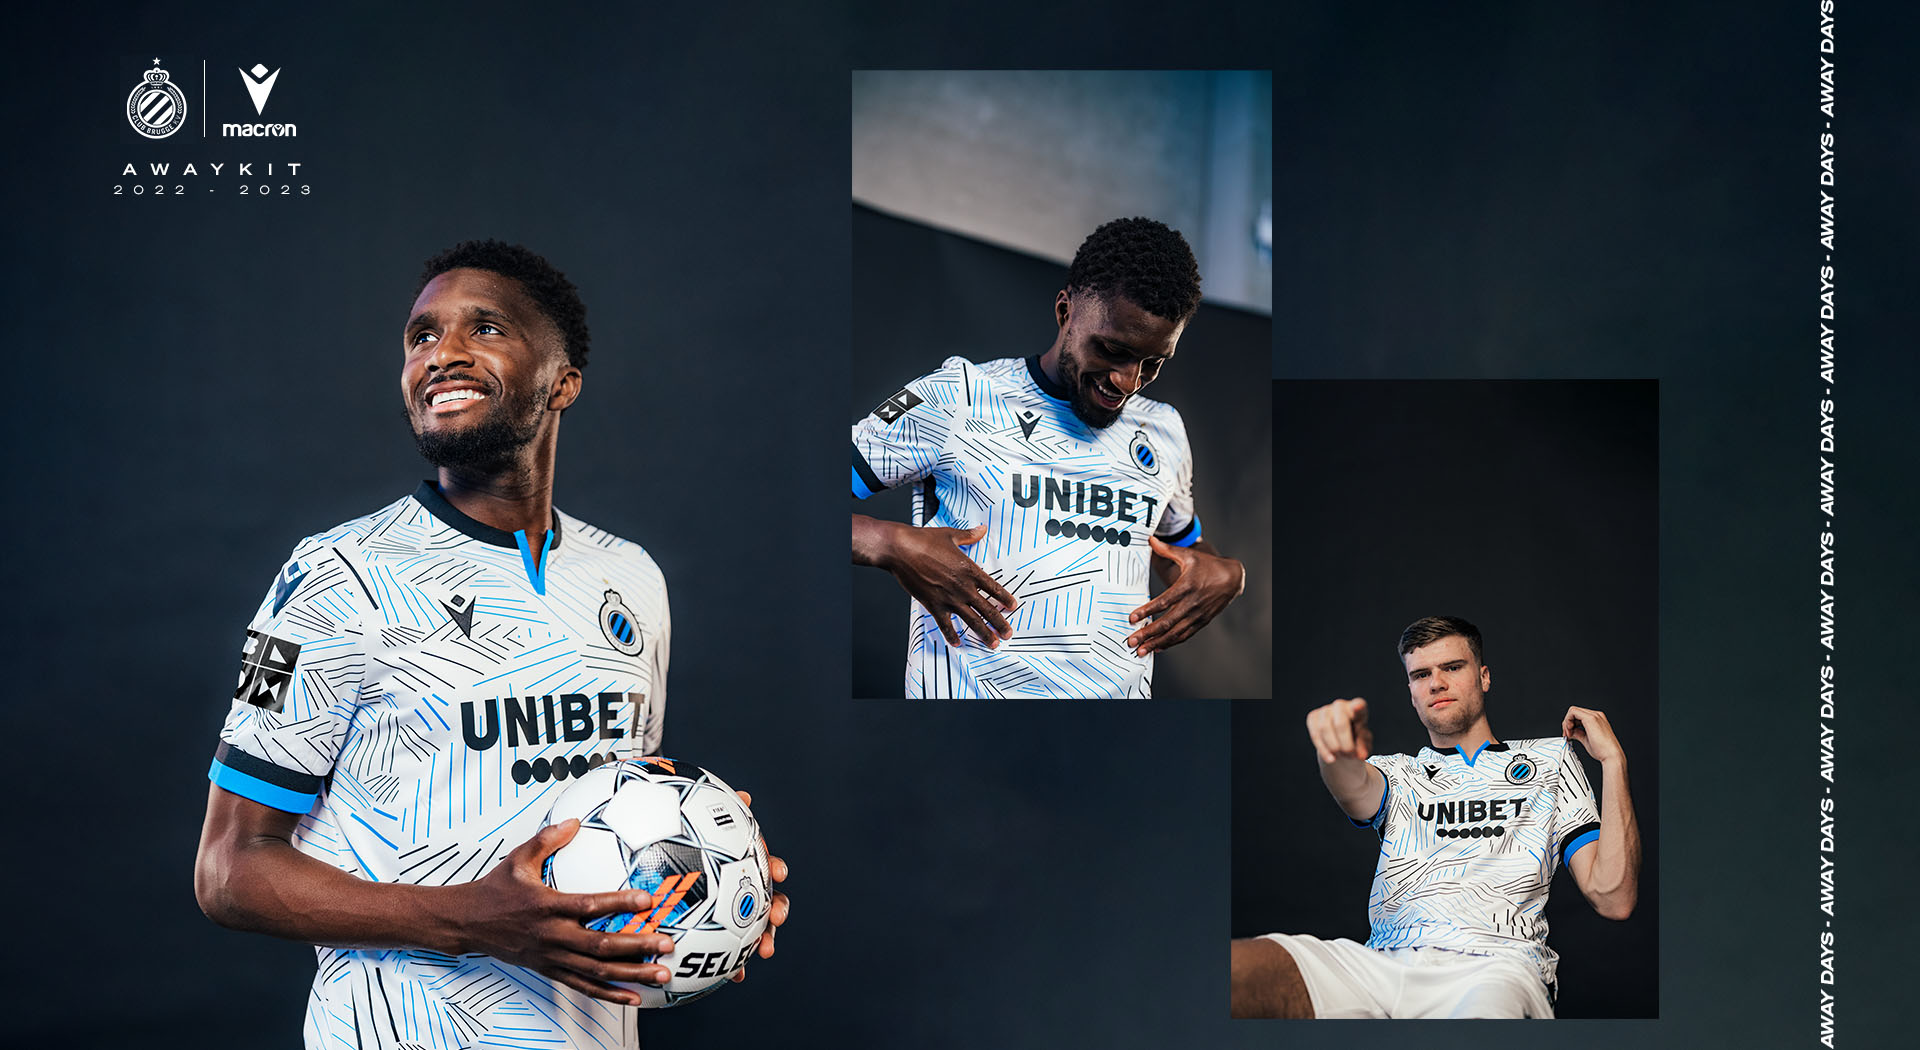 Club Brugge's new away shirt gets an artistic touch